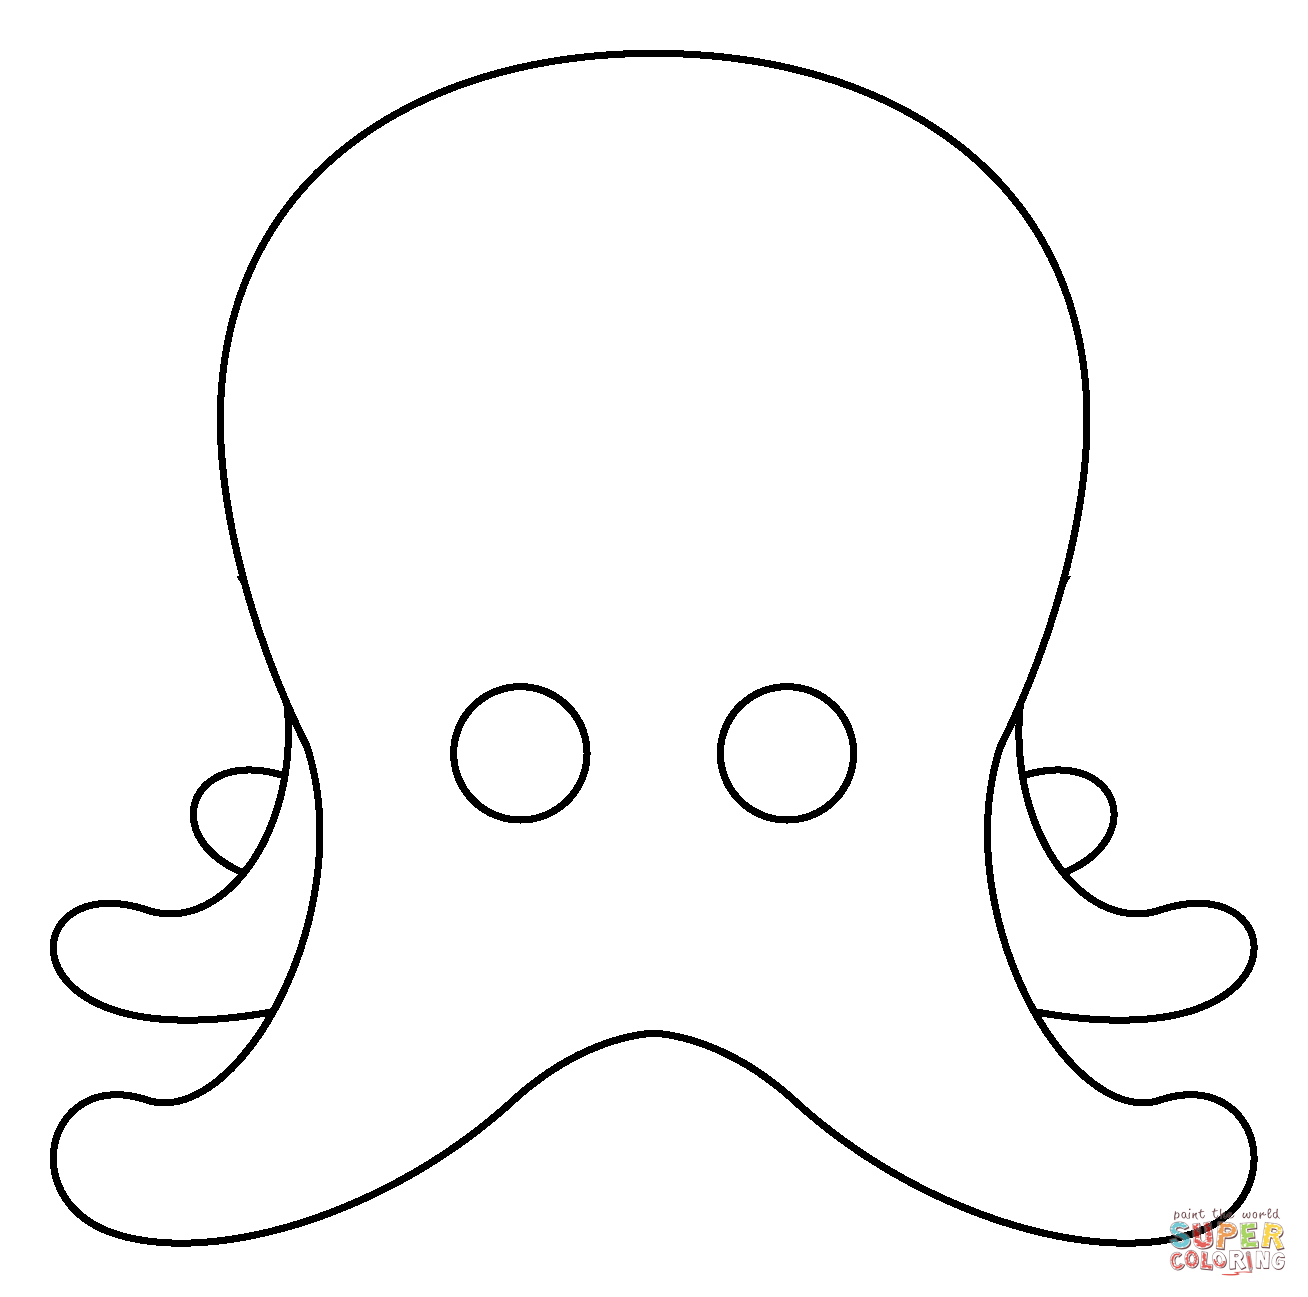 Octopus emoji coloring page free printable coloring pages